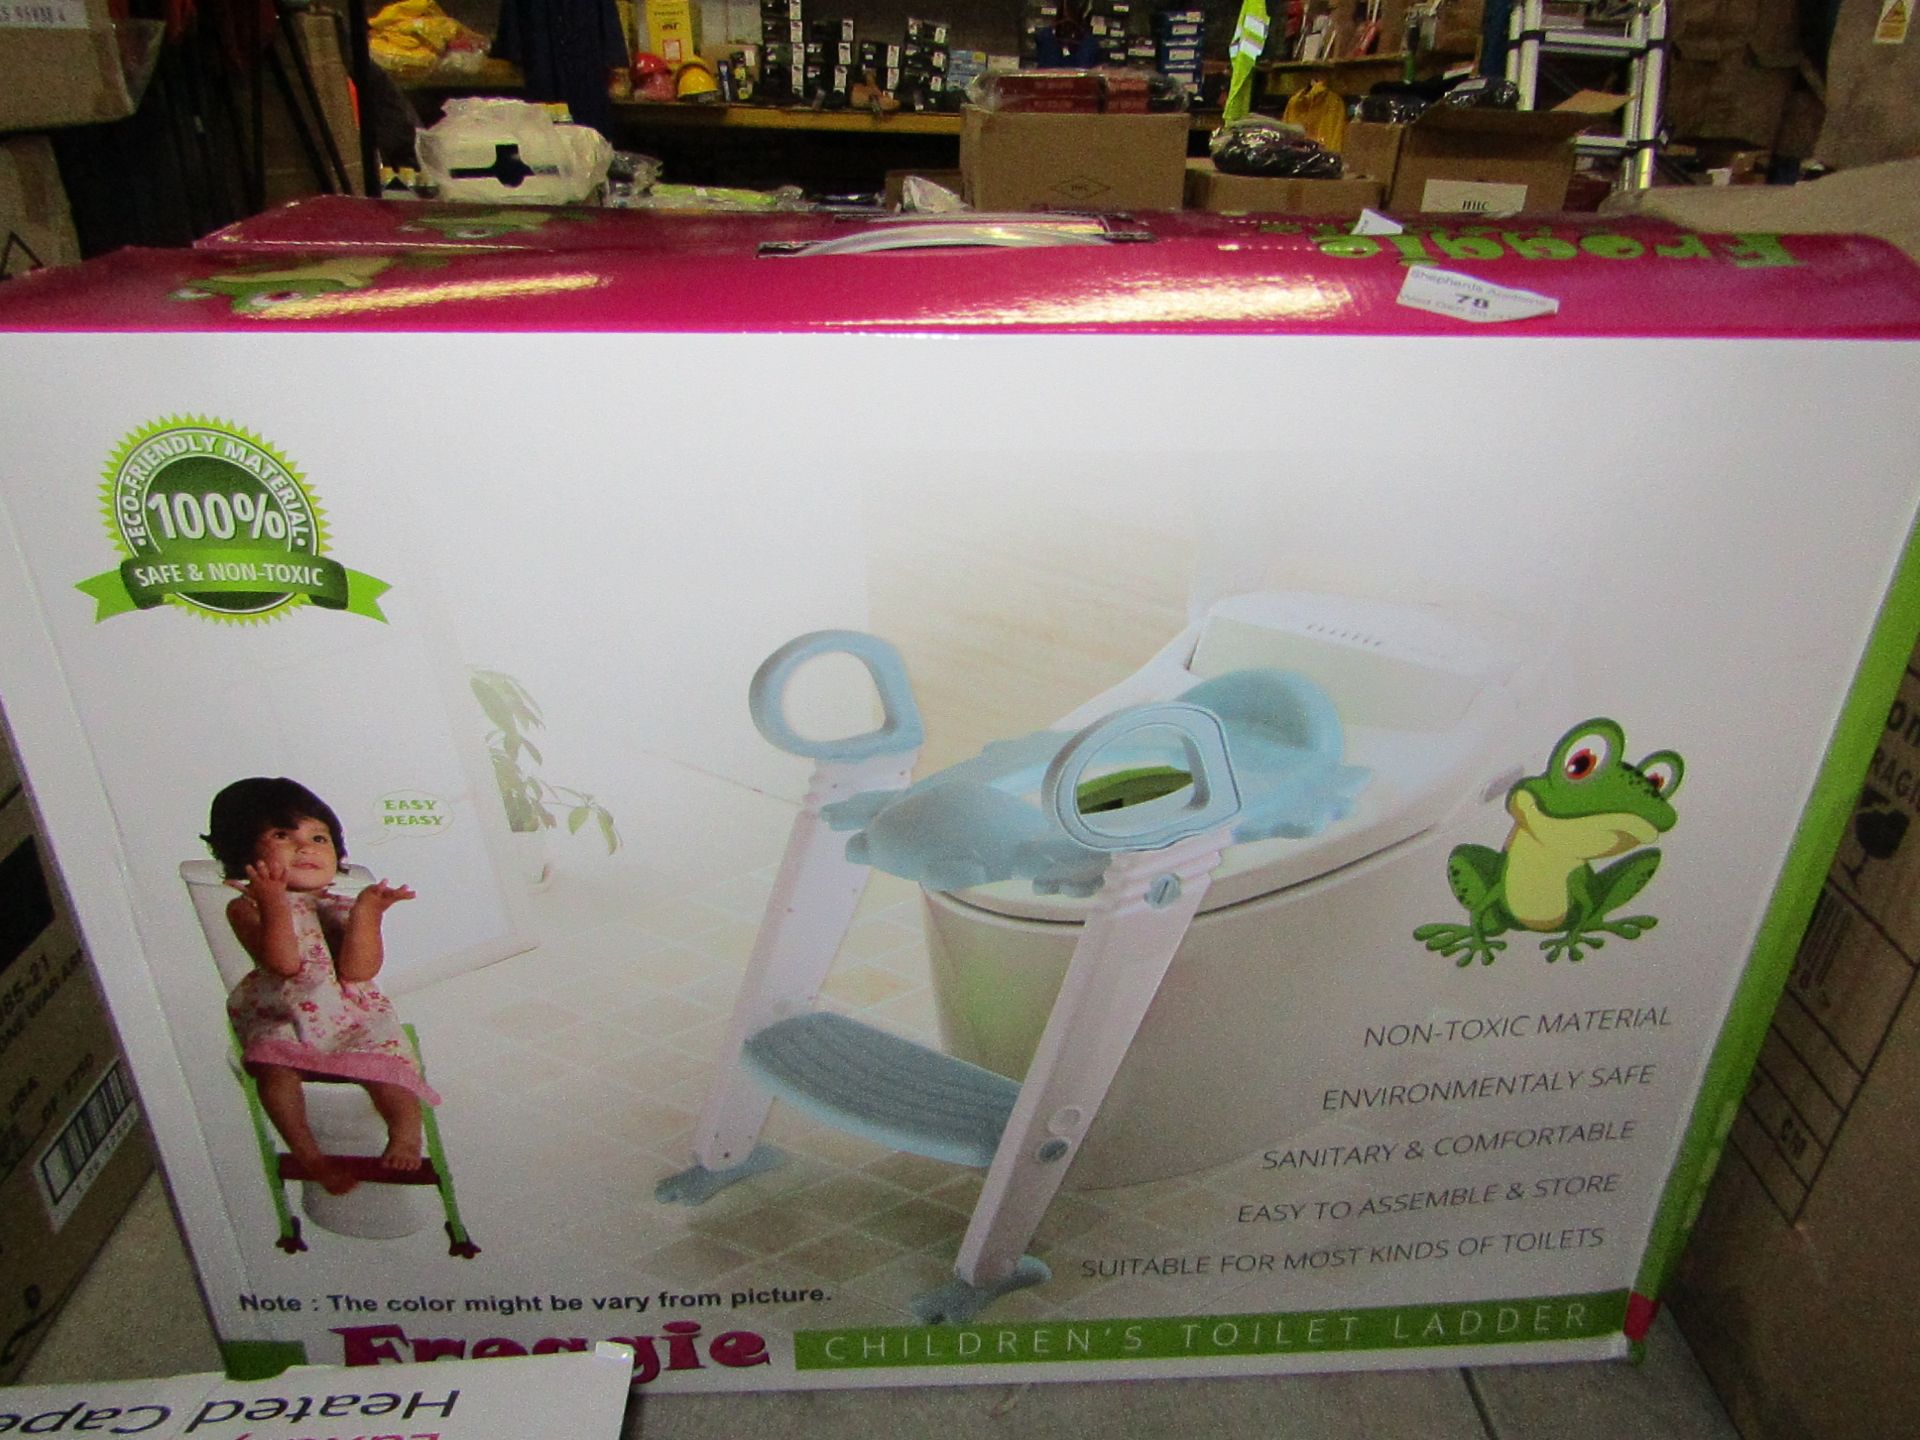 Froggie Chidrens Toilet Ladder Suitable for most toilets new & boxed